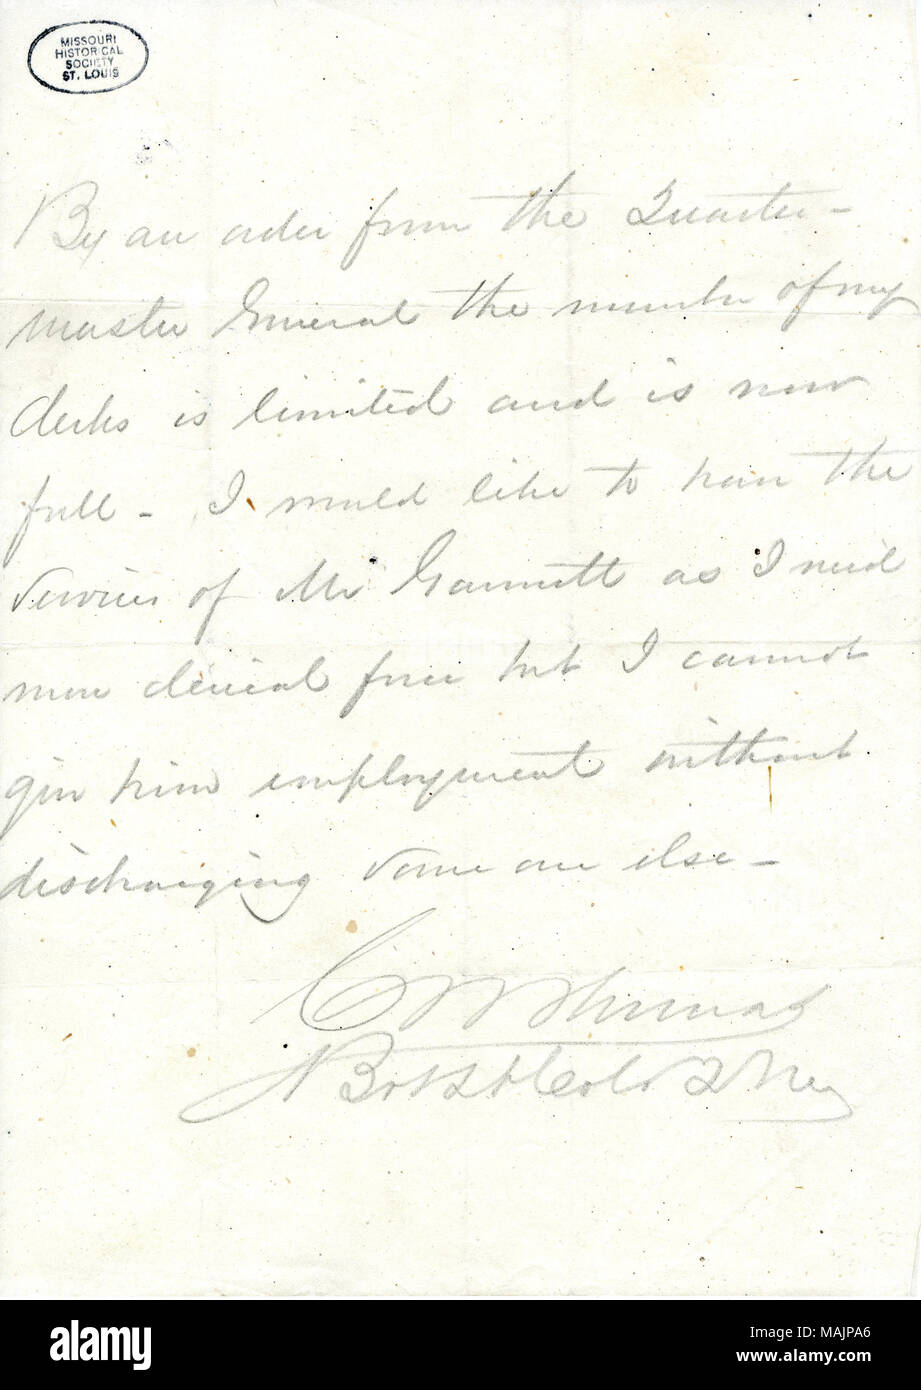 Informs Sherman that he would like to have the clerical services of Mr. Gannett, but cannot give him employment without discharging someone else.  Transcription: By an order from the Quarter-Master General the number of my Clerks is limited and is now full. I would like to have the services of Mr Gannett as I need more clerical force but I cannot give him employment without discharging some one else_ C W Thomas Bvt Lt Col Q Mr [Brevet Lieutenant Colonel Quartermaster] Title: Letter signed C.W. Thomas [to William T. Sherman], June 1868  . June 1868. Thomas, C. W. Stock Photo